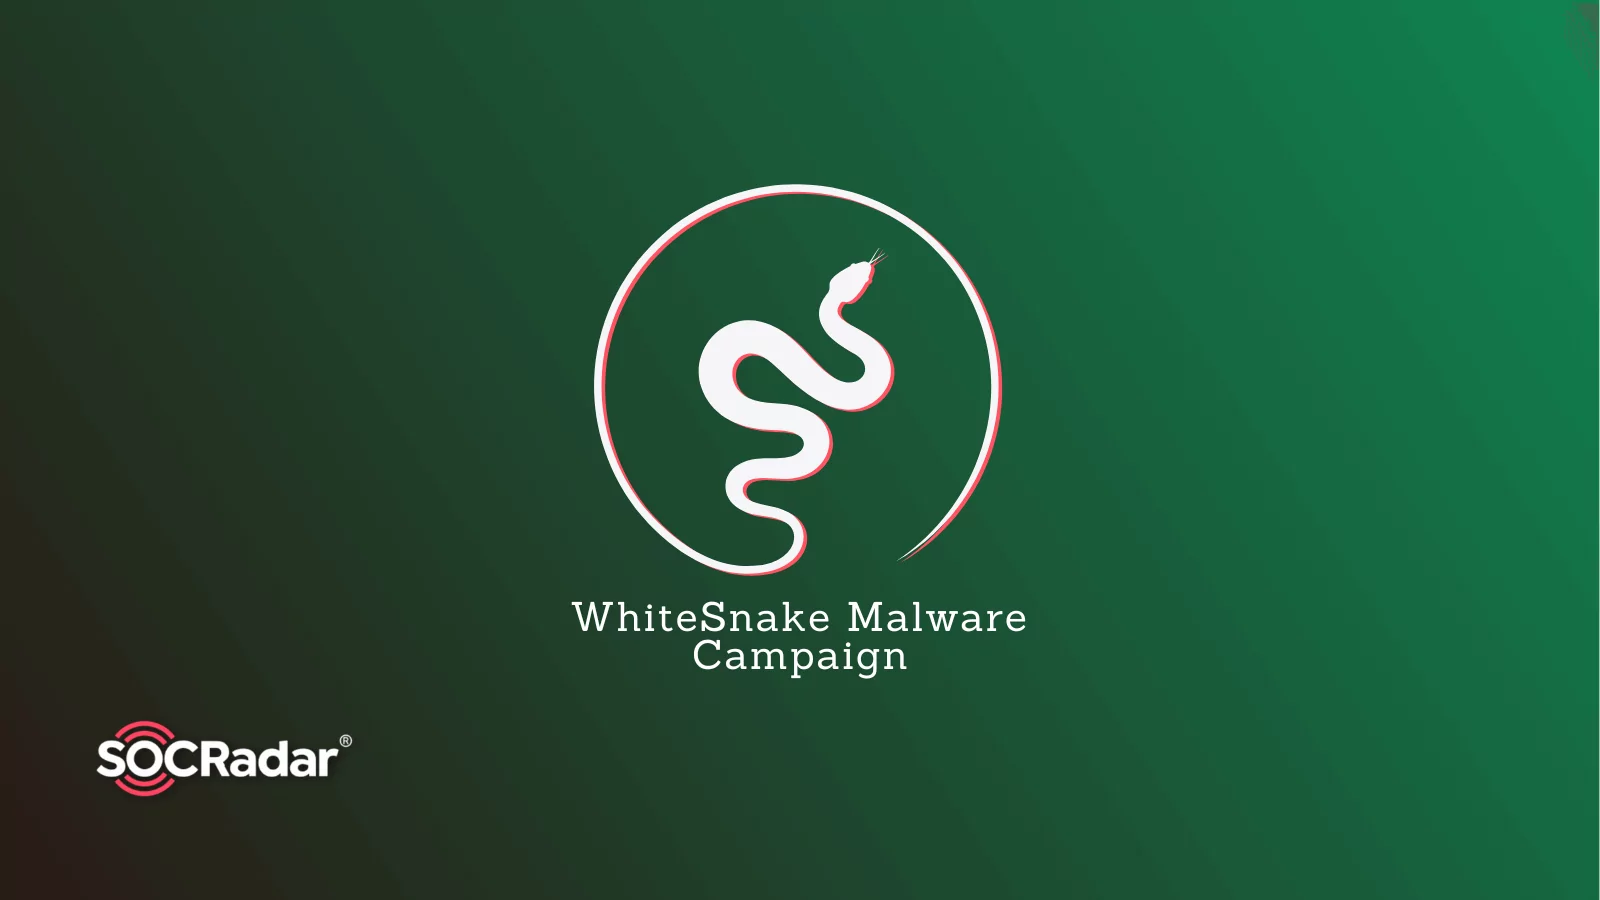 SOCRadar® Cyber Intelligence Inc. | PyPI Packages Found Distributing Payloads in WhiteSnake Malware Campaign